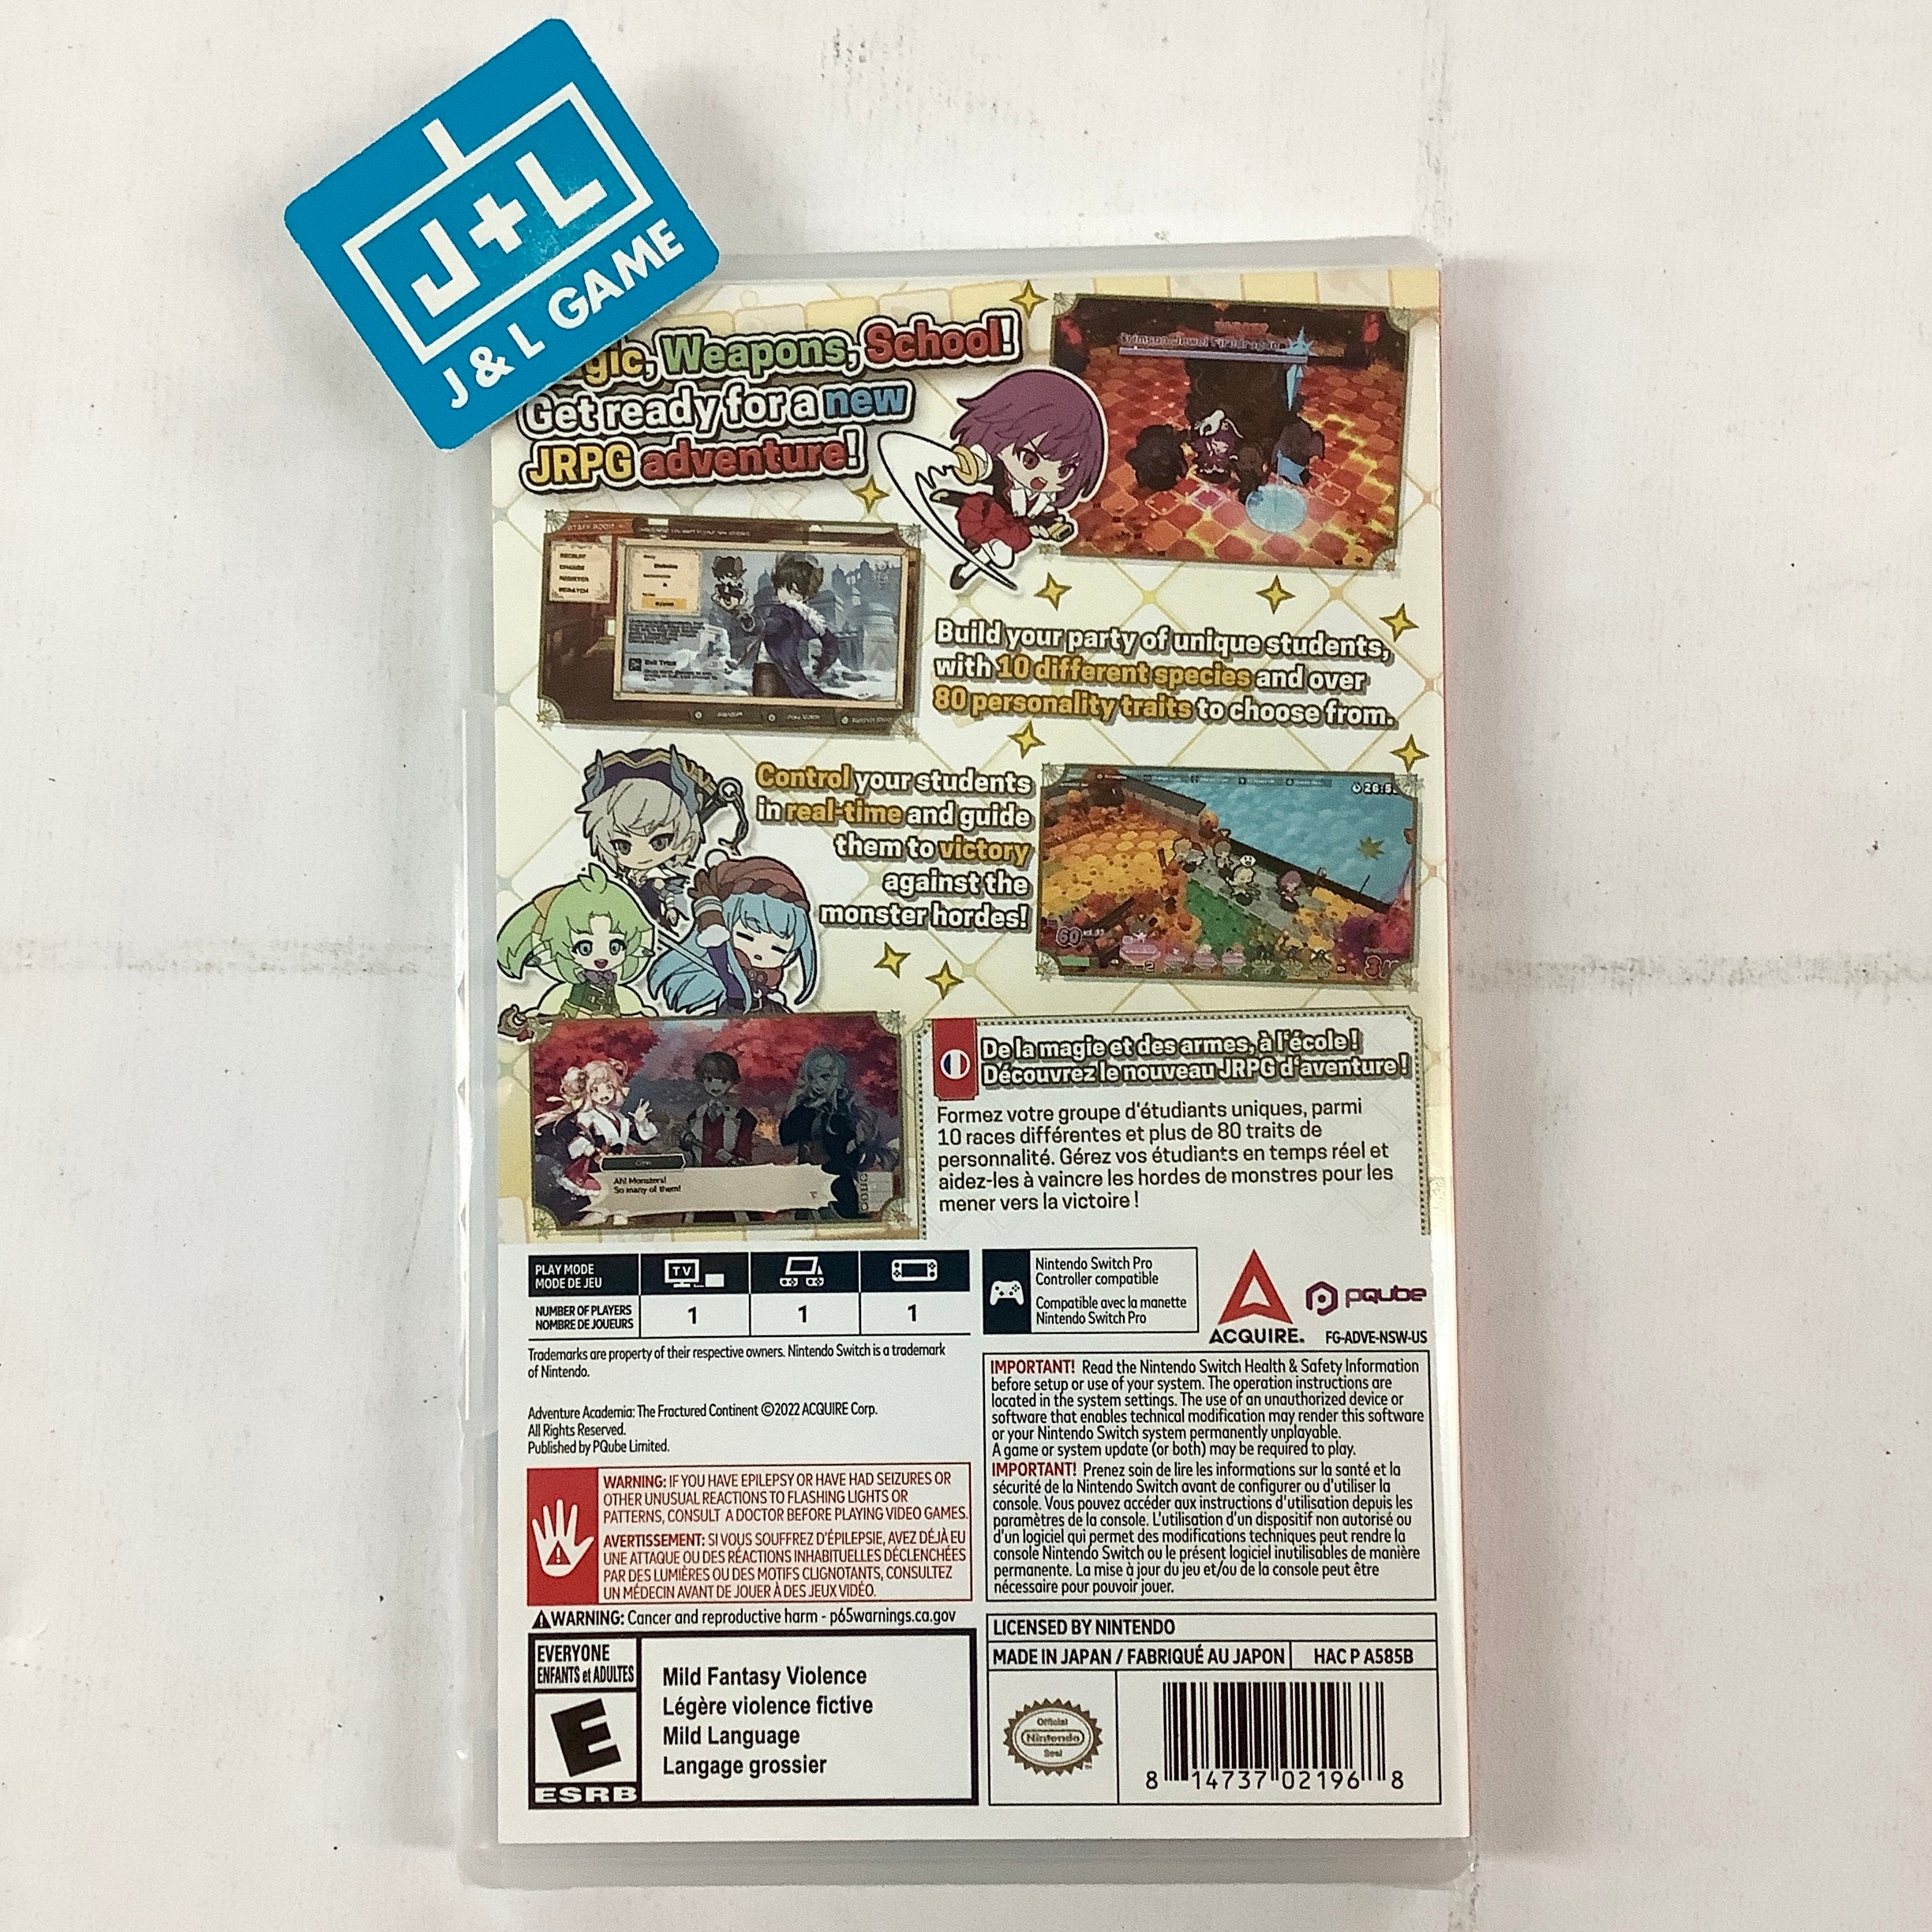 Adventure Academia: The Fractured Continent - (NSW) Nintendo Switch Video Games PQube   